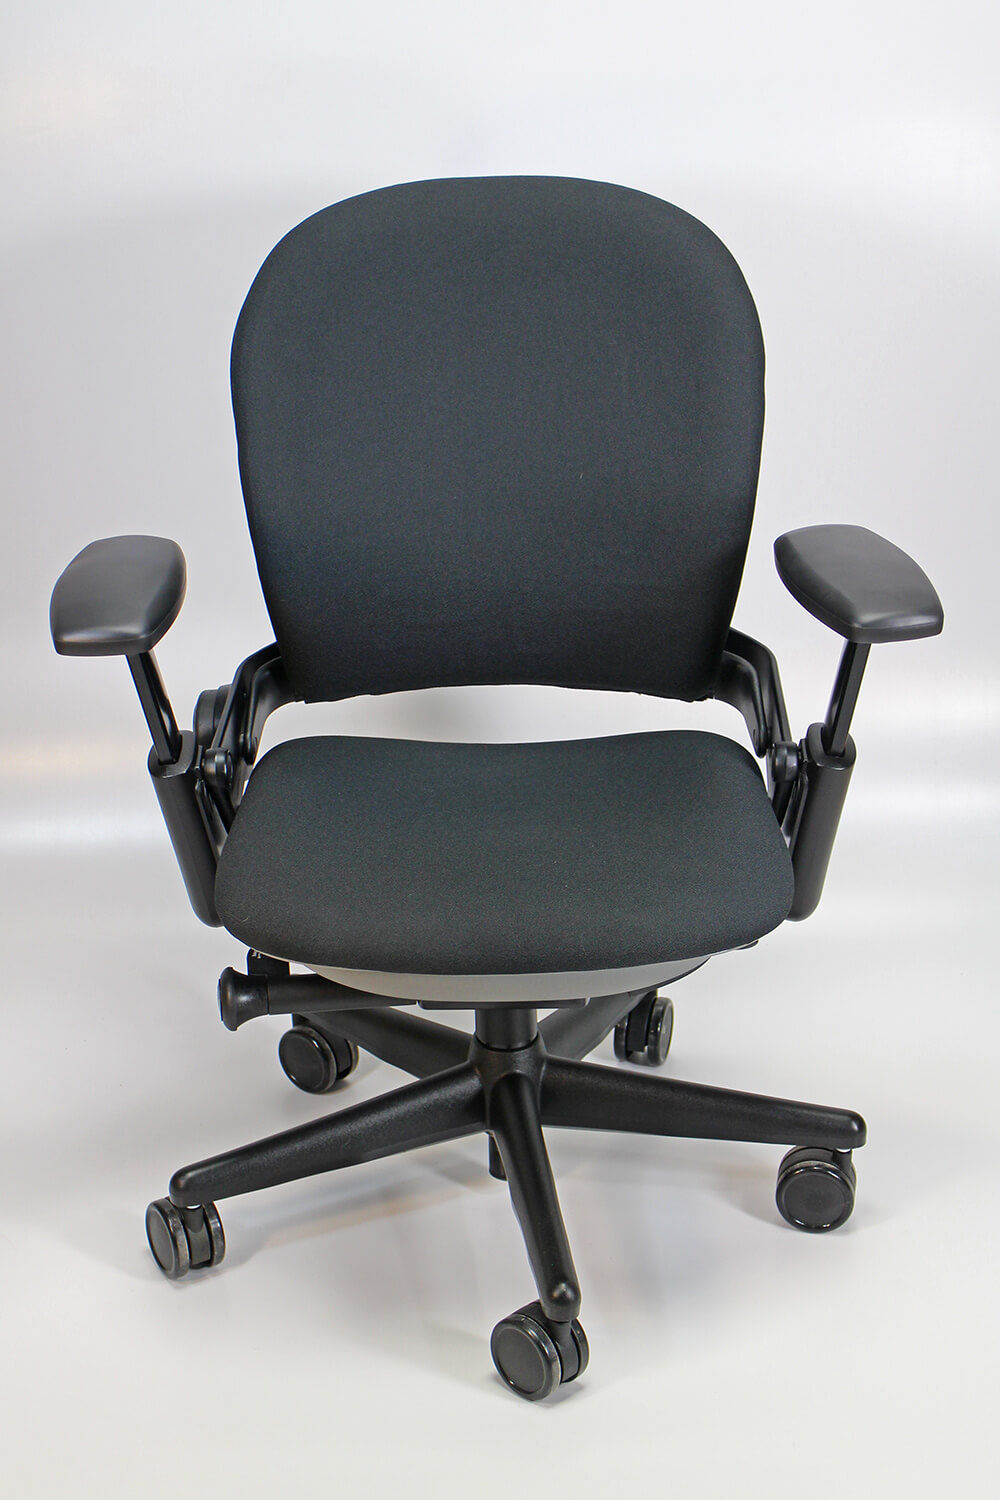 Steelcase leap v1 front view